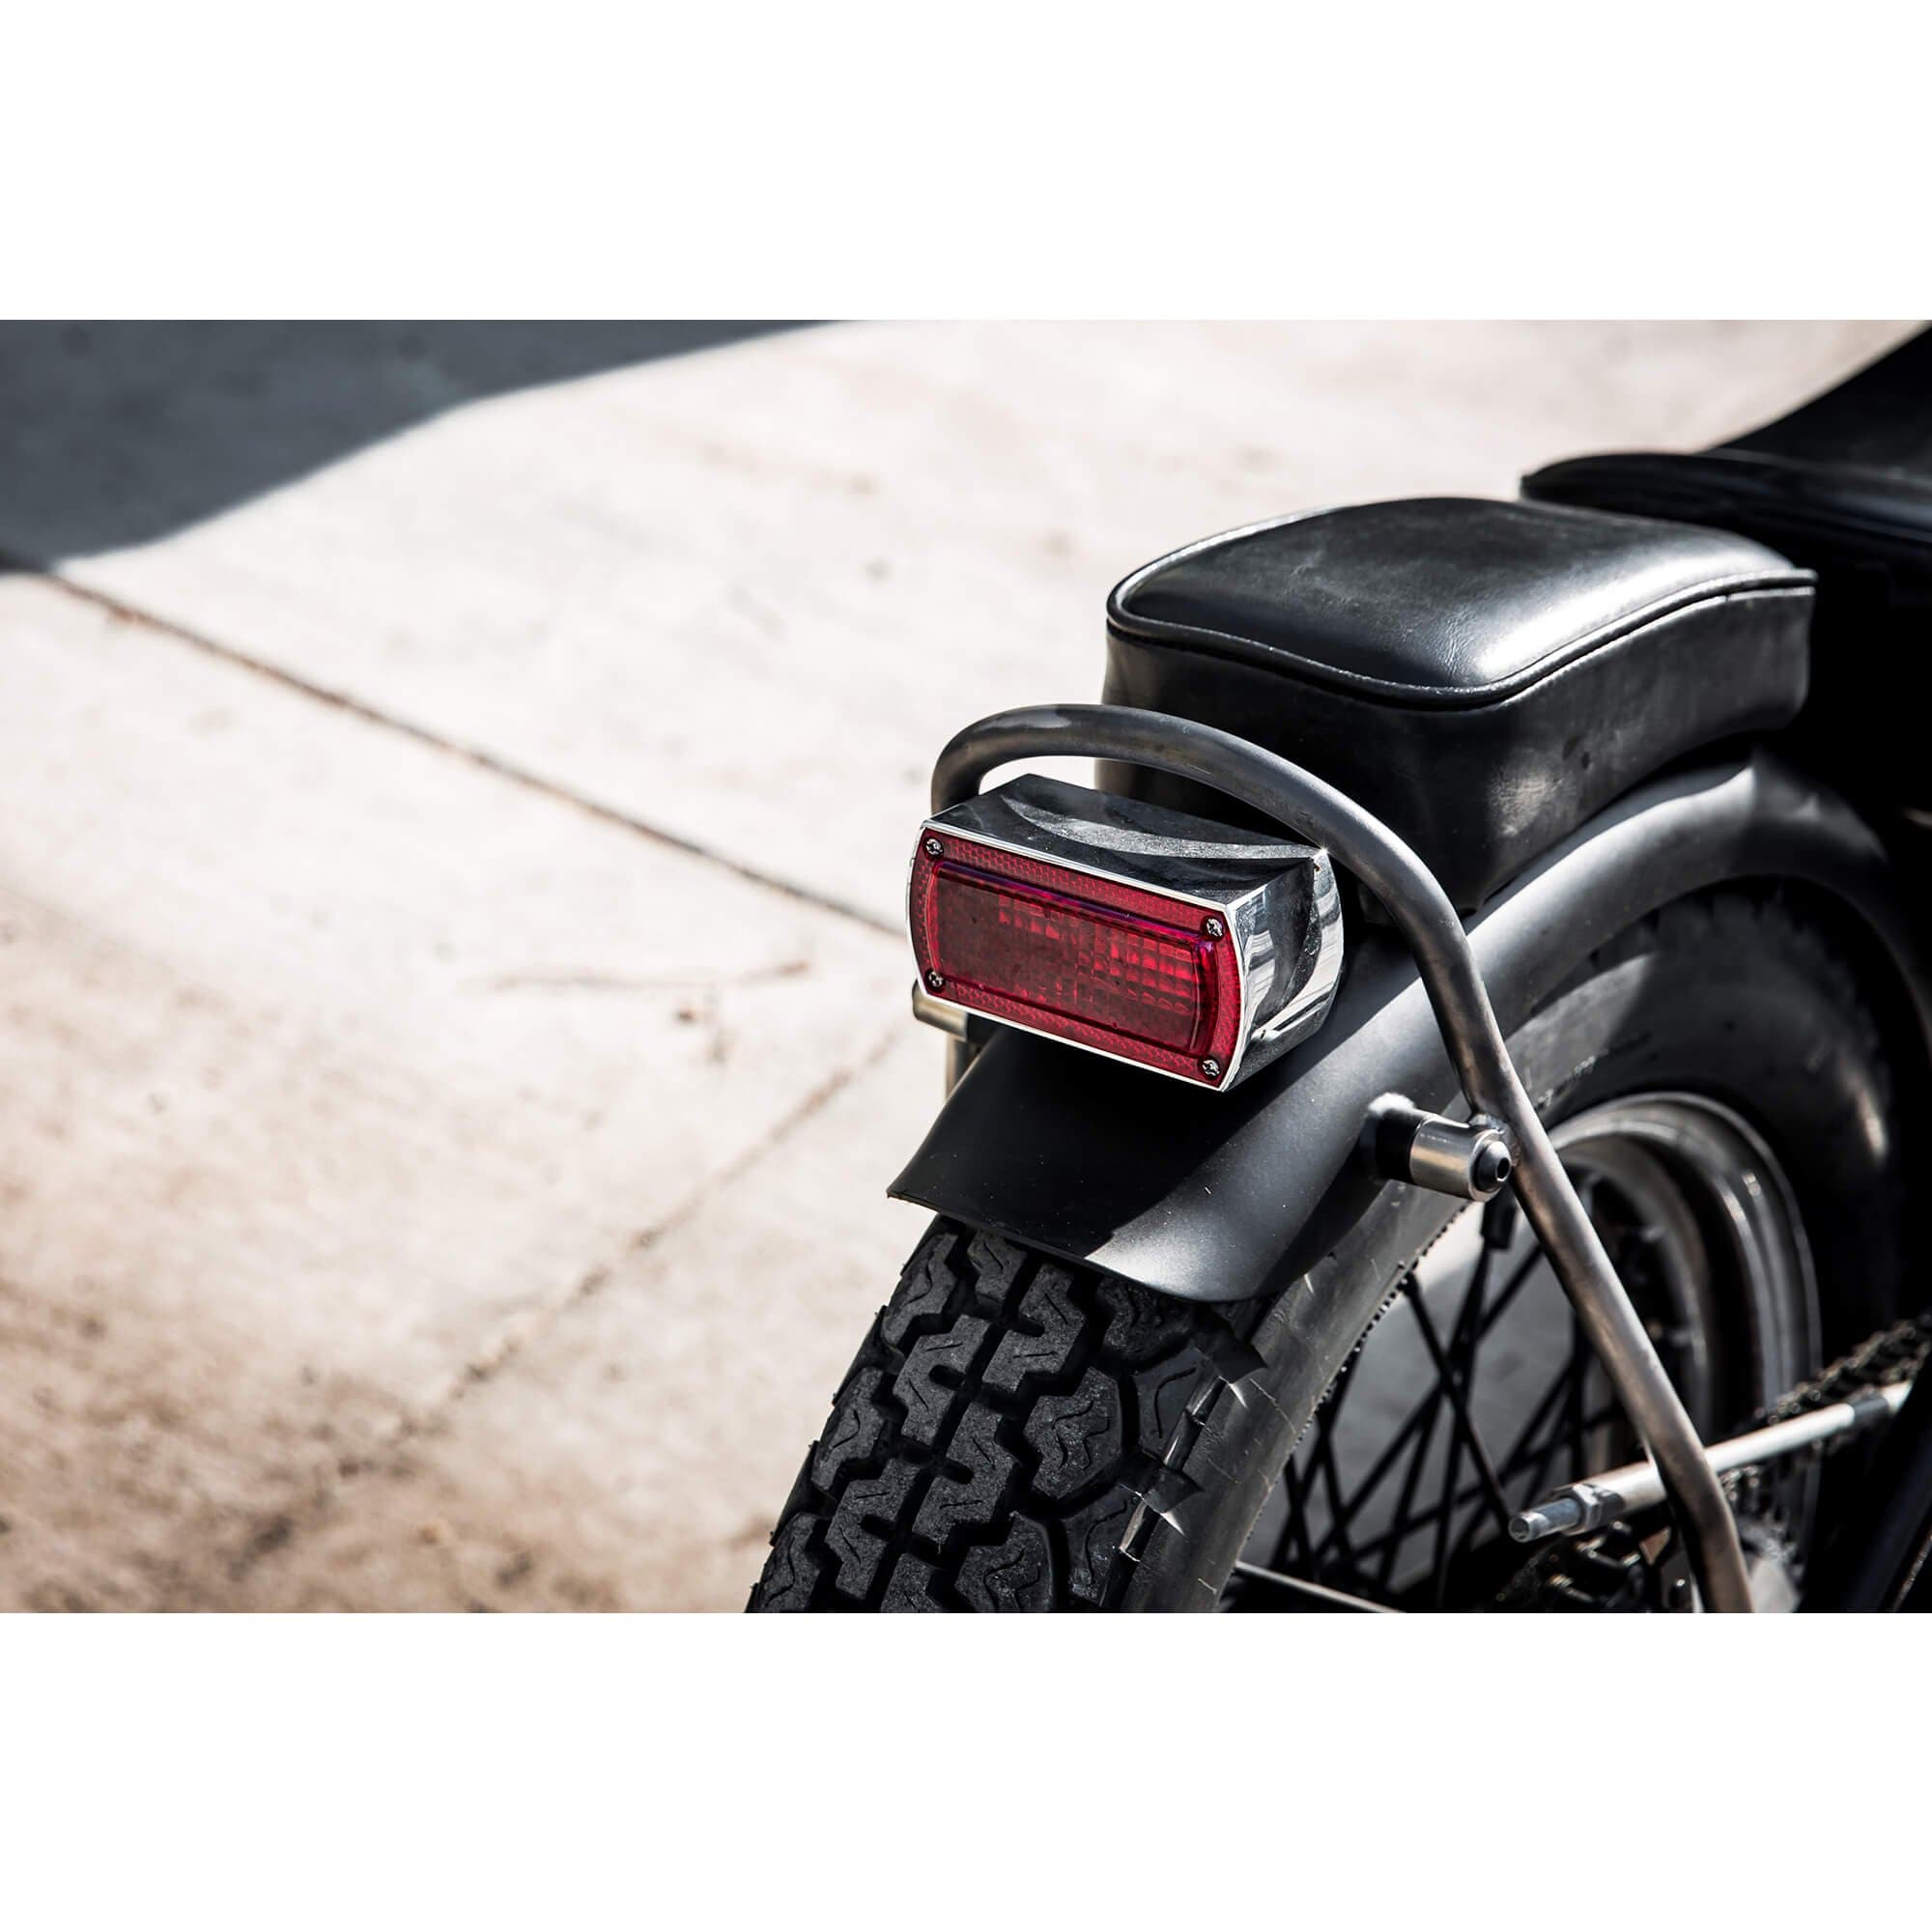 Prism Supply Co. The Prism Box Chopper Tail light – Lowbrow Customs